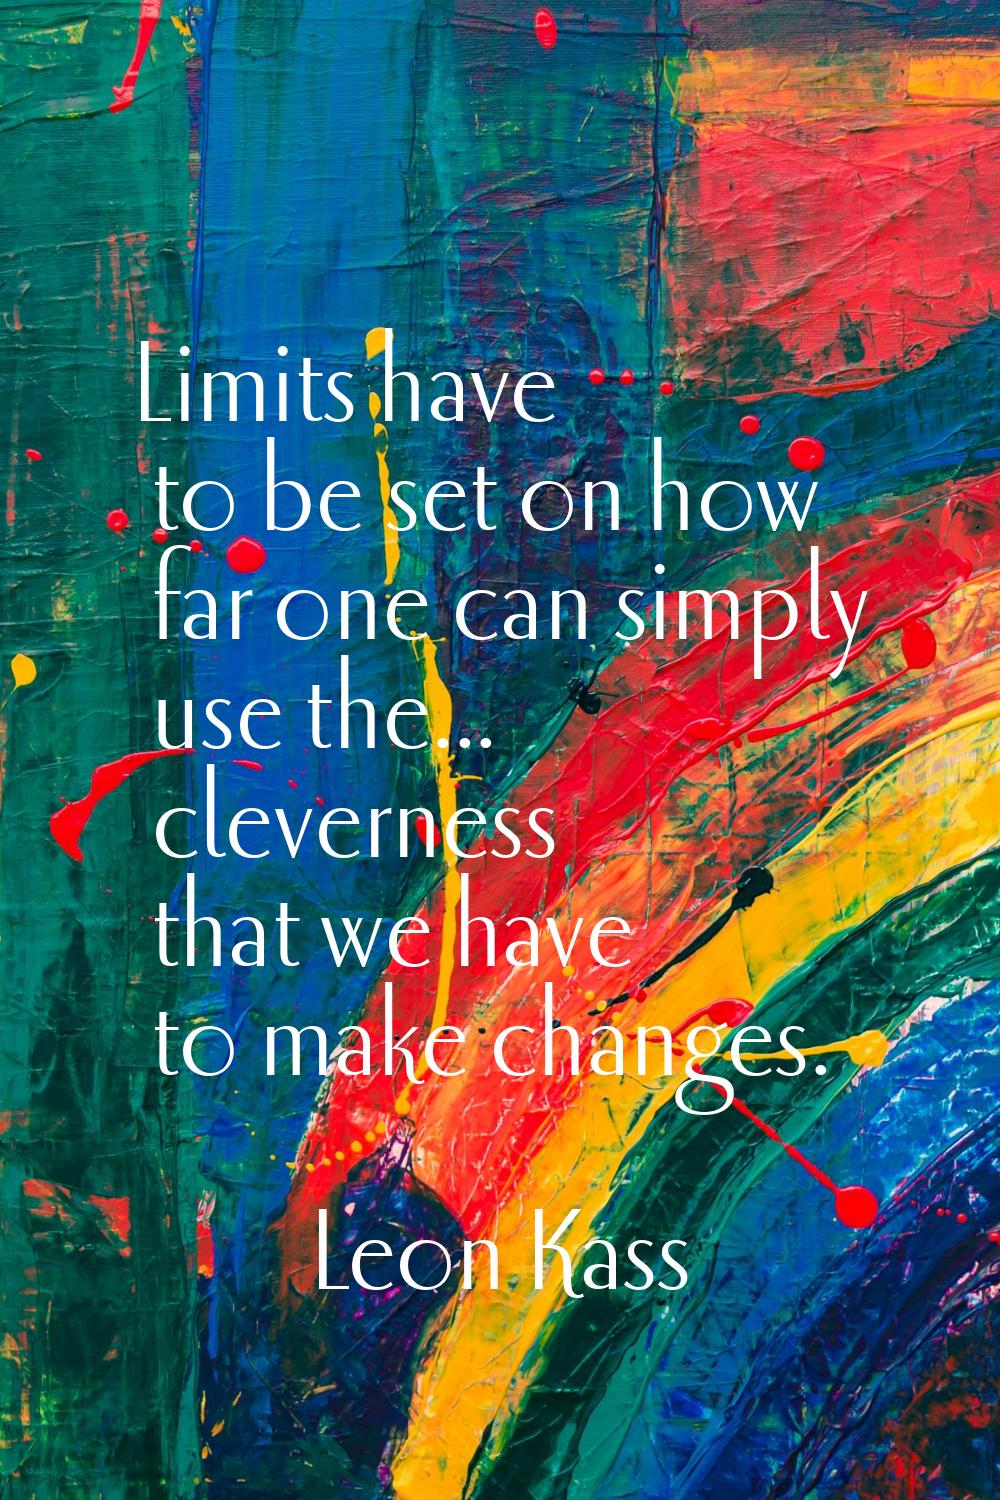 Limits have to be set on how far one can simply use the... cleverness that we have to make changes.